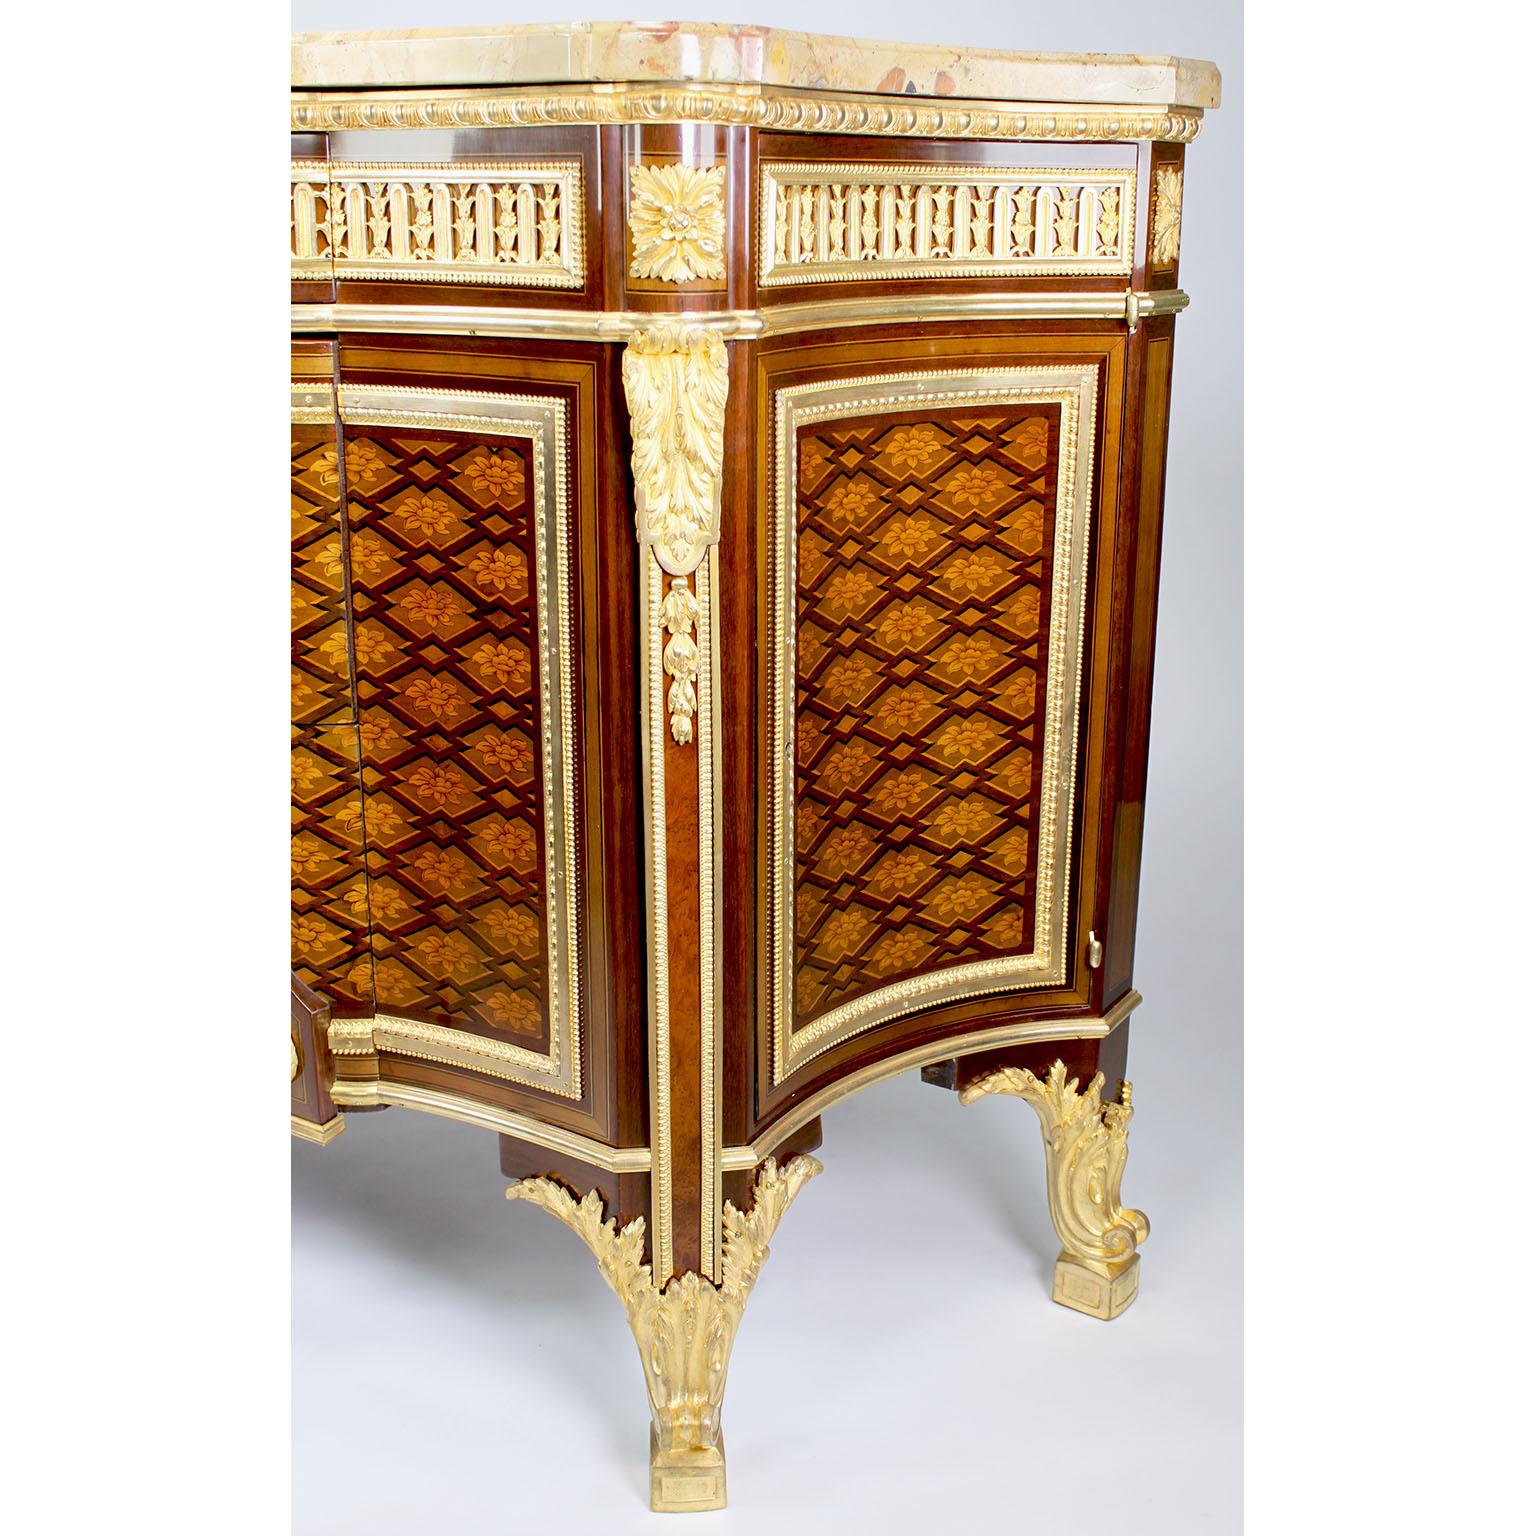 French 19th Century Louis XV-XVI Ormolu Mounted Marquetry Commode Marble Top For Sale 3